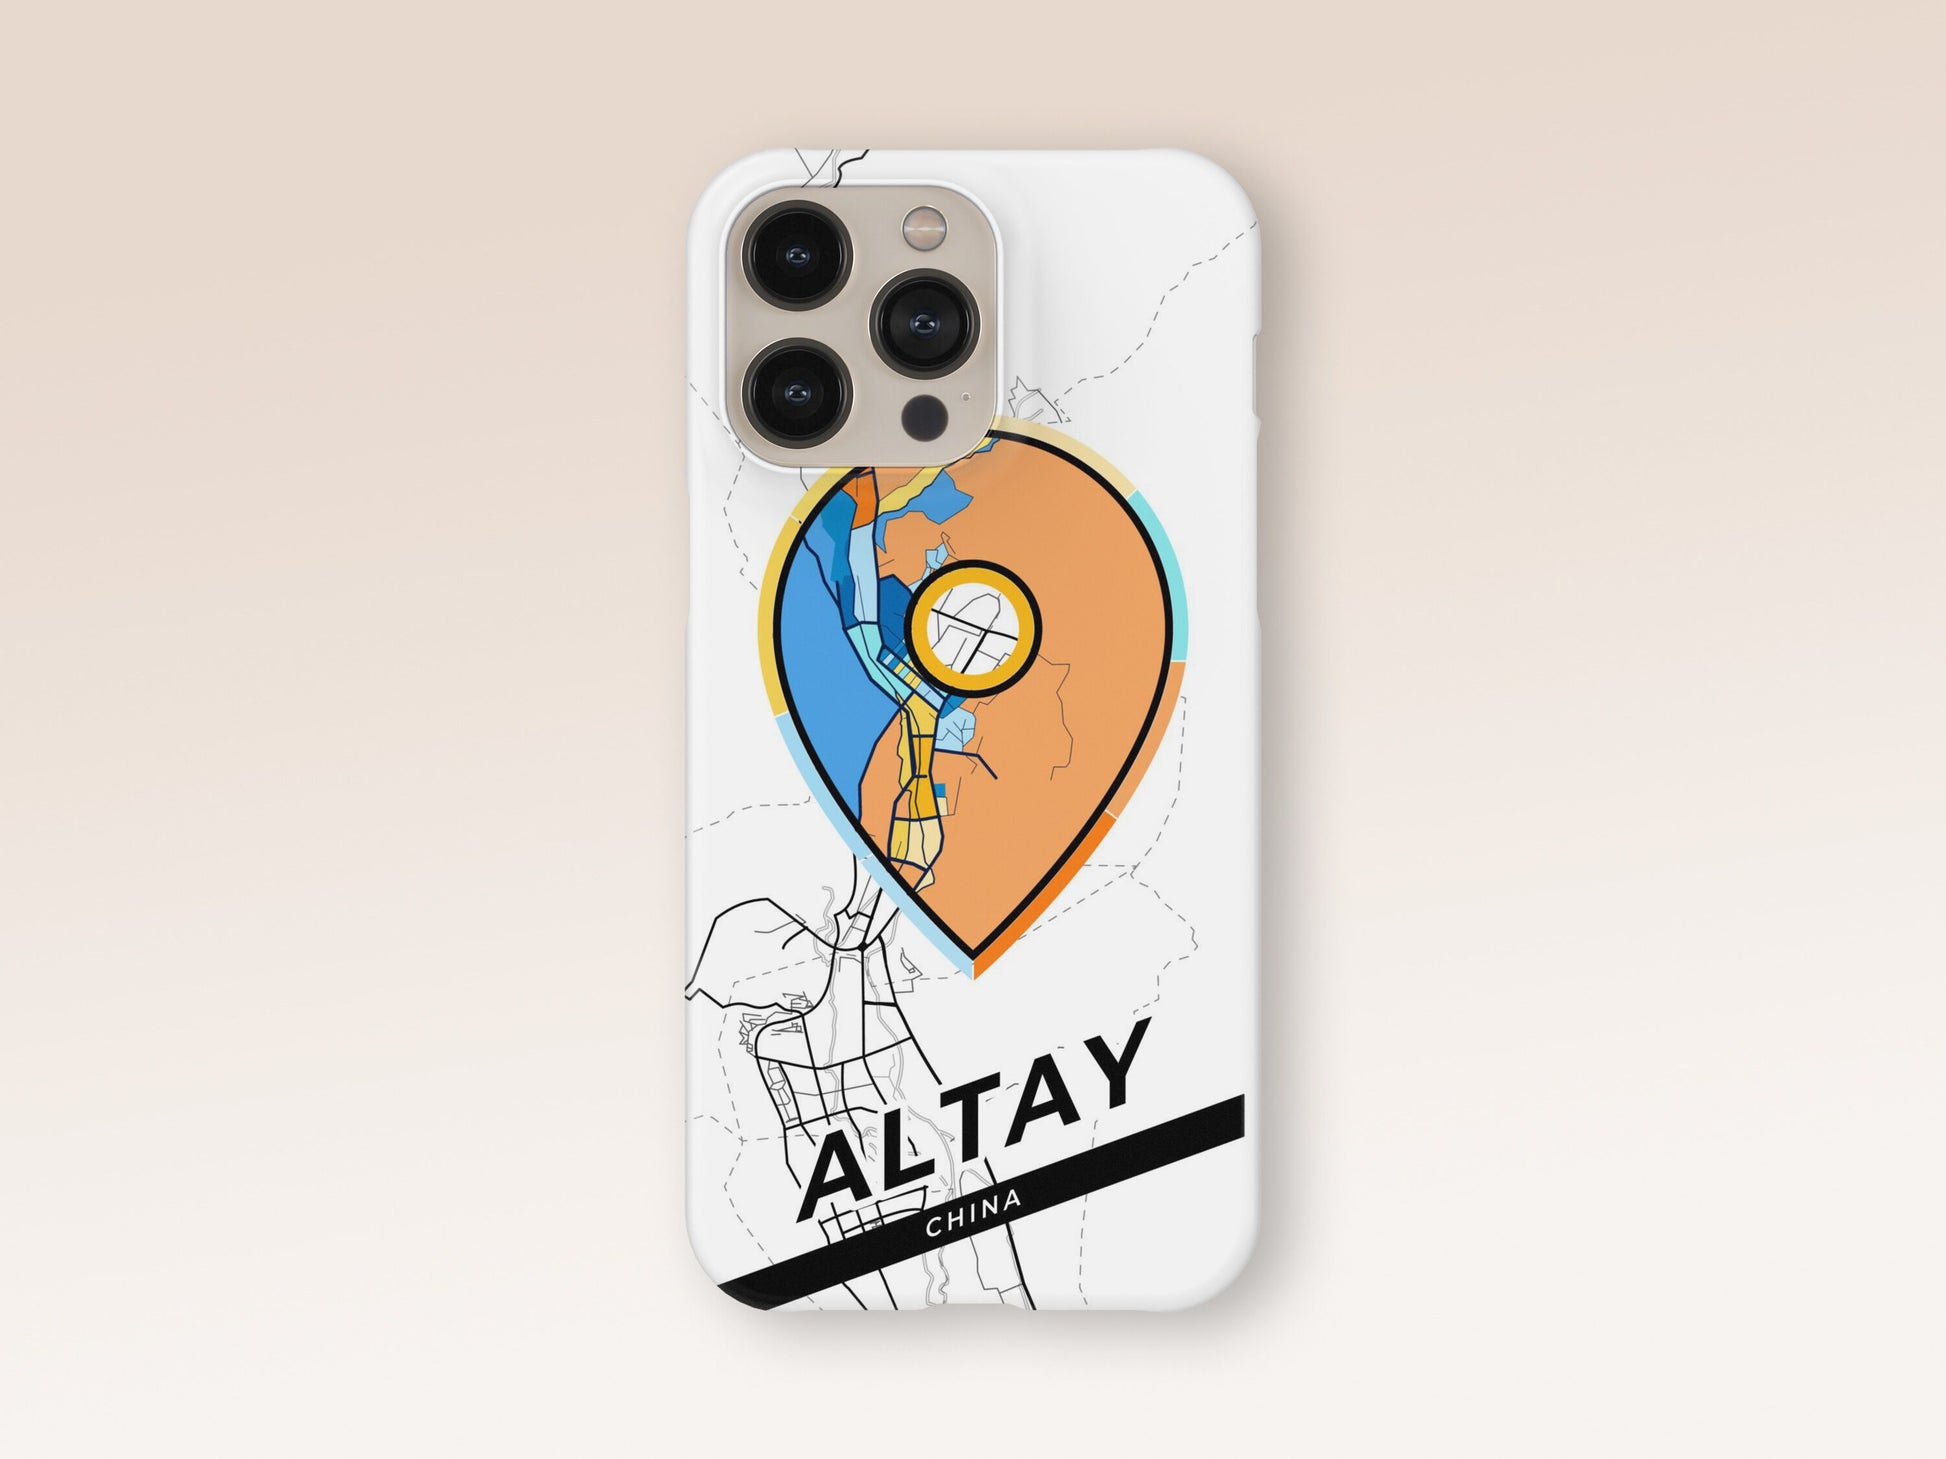 Altay China slim phone case with colorful icon. Birthday, wedding or housewarming gift. Couple match cases. 1